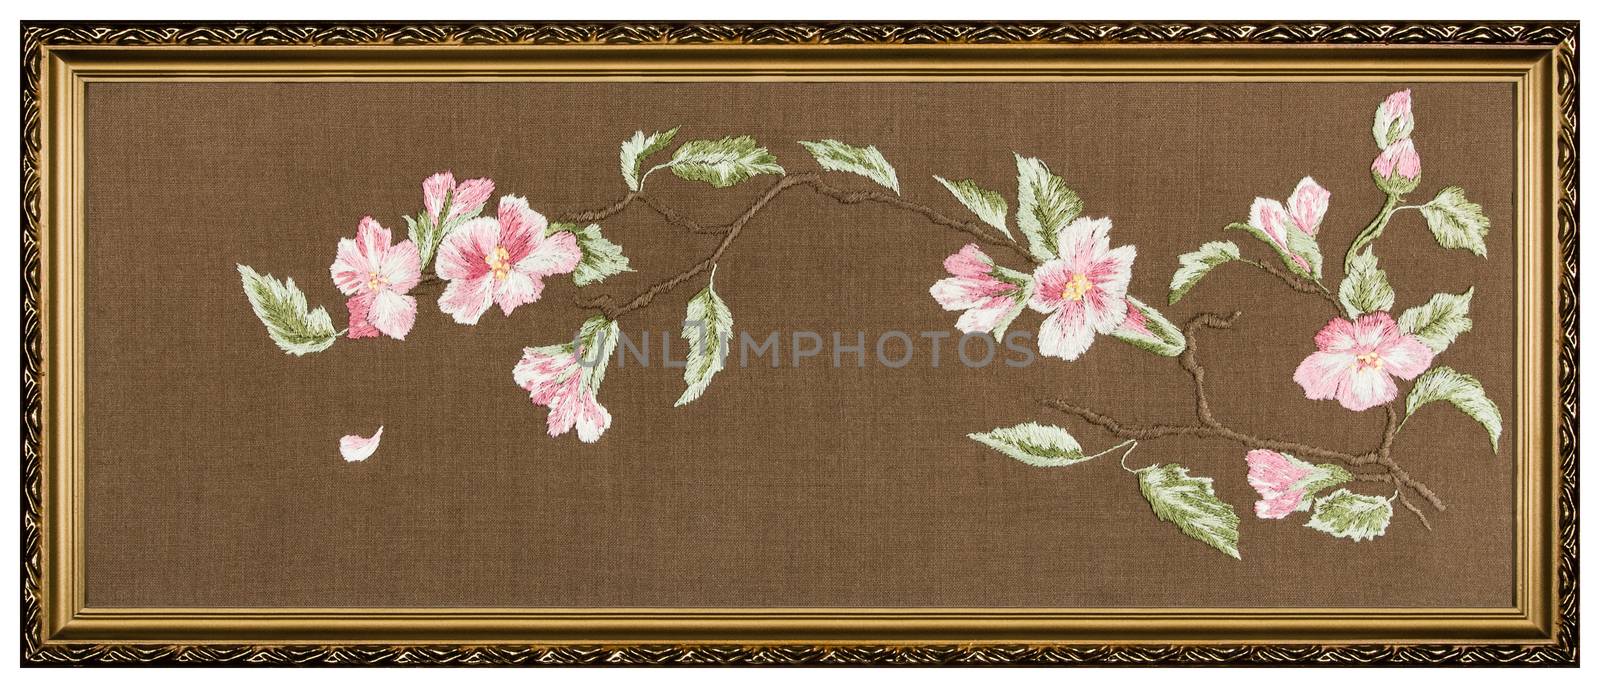 Embroidered picture in the frame, isolated on white background